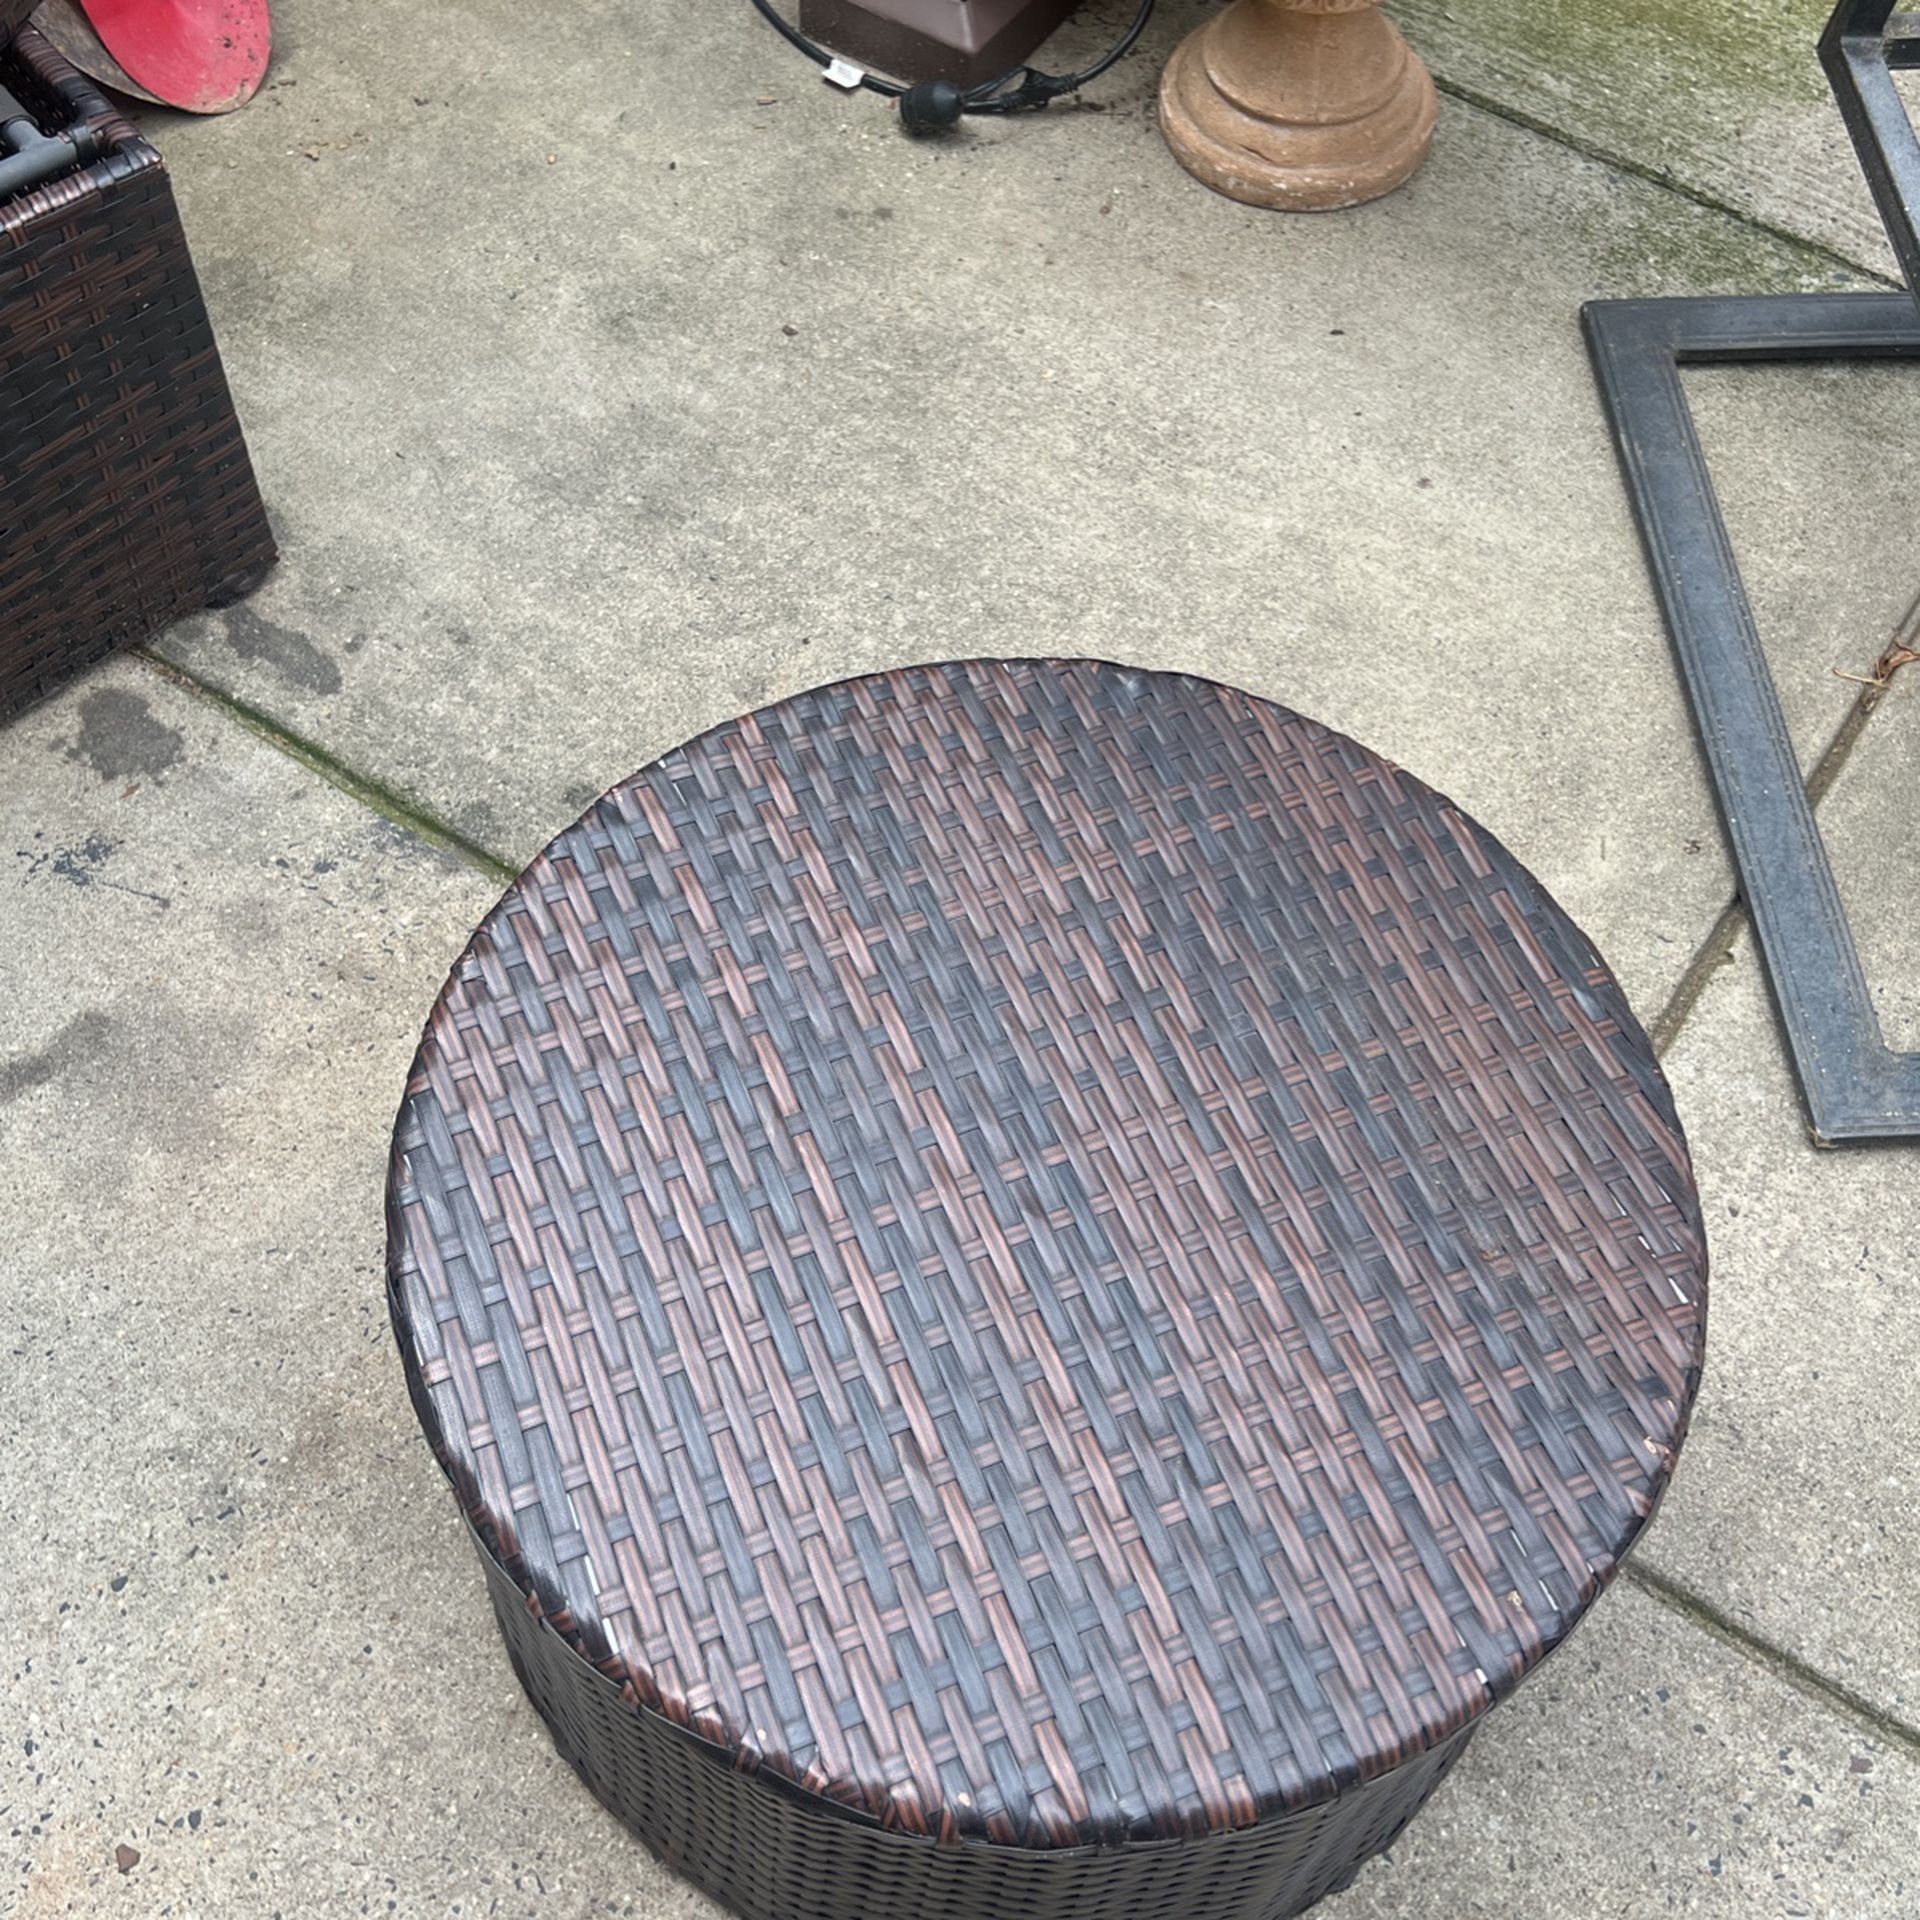 Brown Wicker Backyard Set Perfect For A Cookout 